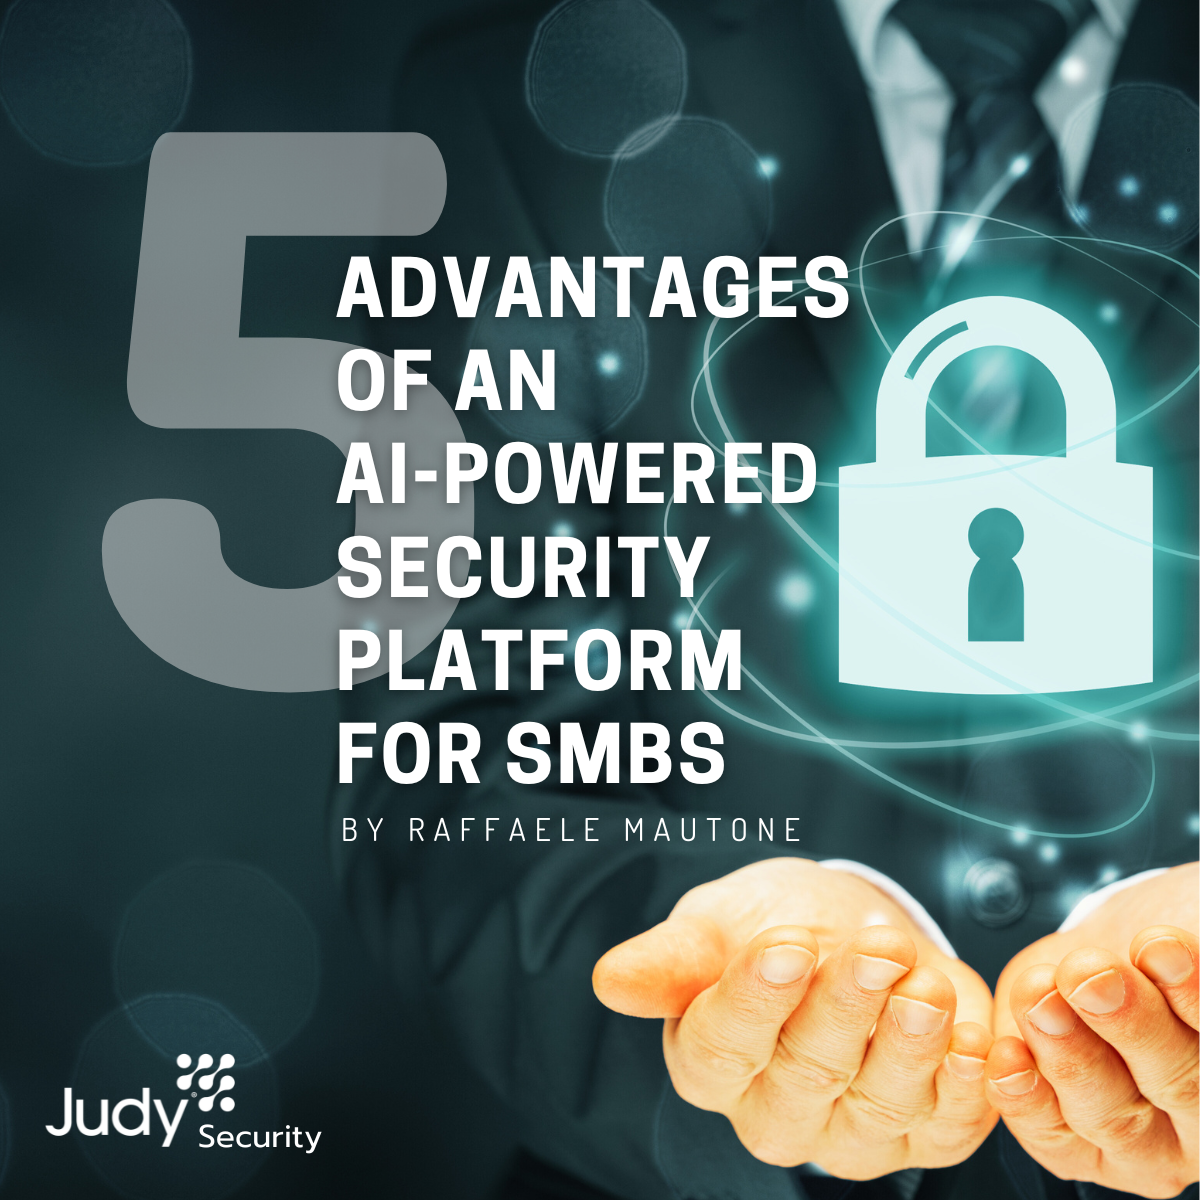 Top 5 Advantages of an AI-Powered Security Platform for SMBs